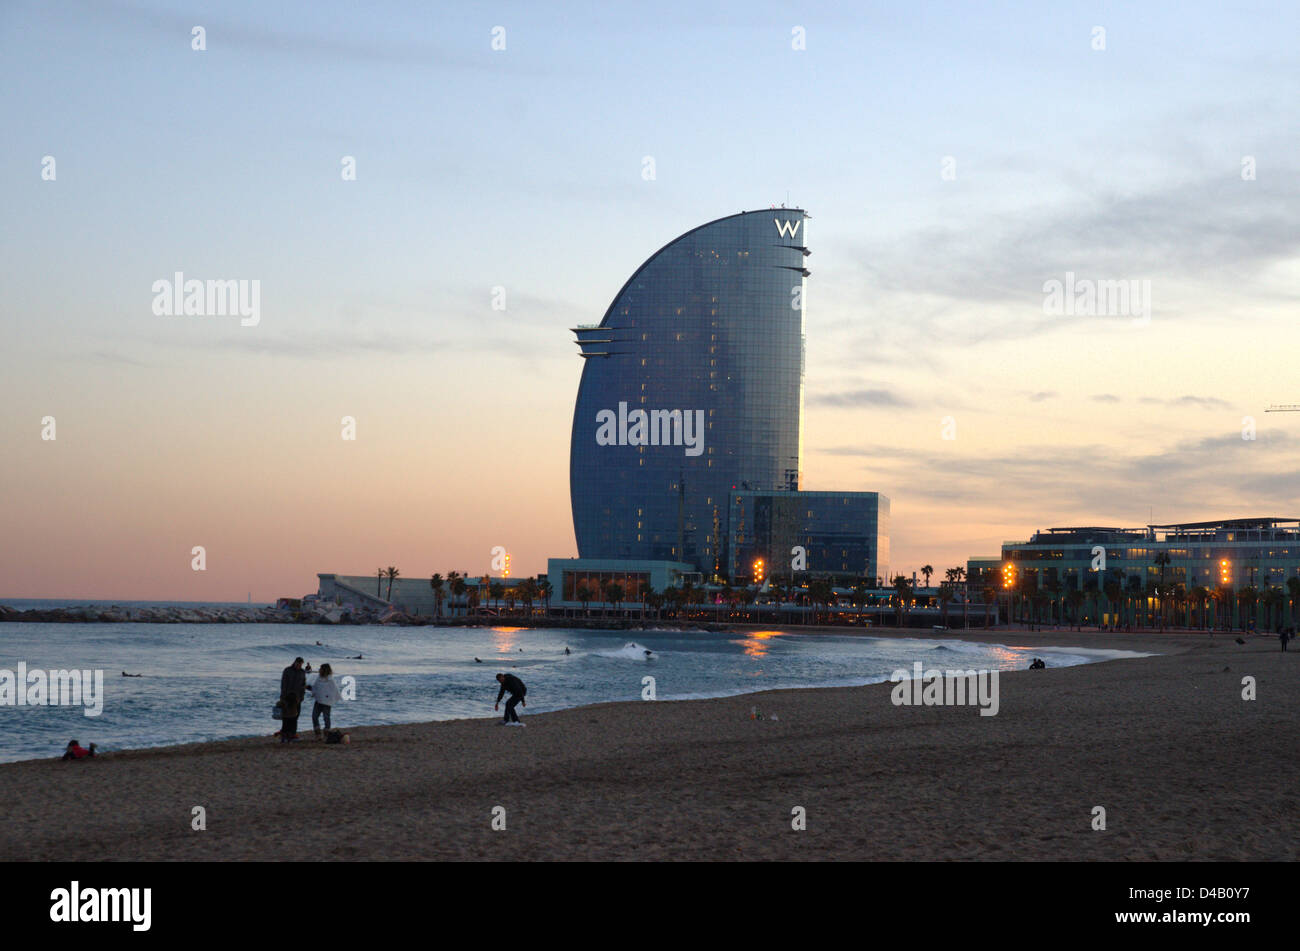 Ambient on the Barcelona beach at night. People watching the sea with W ...